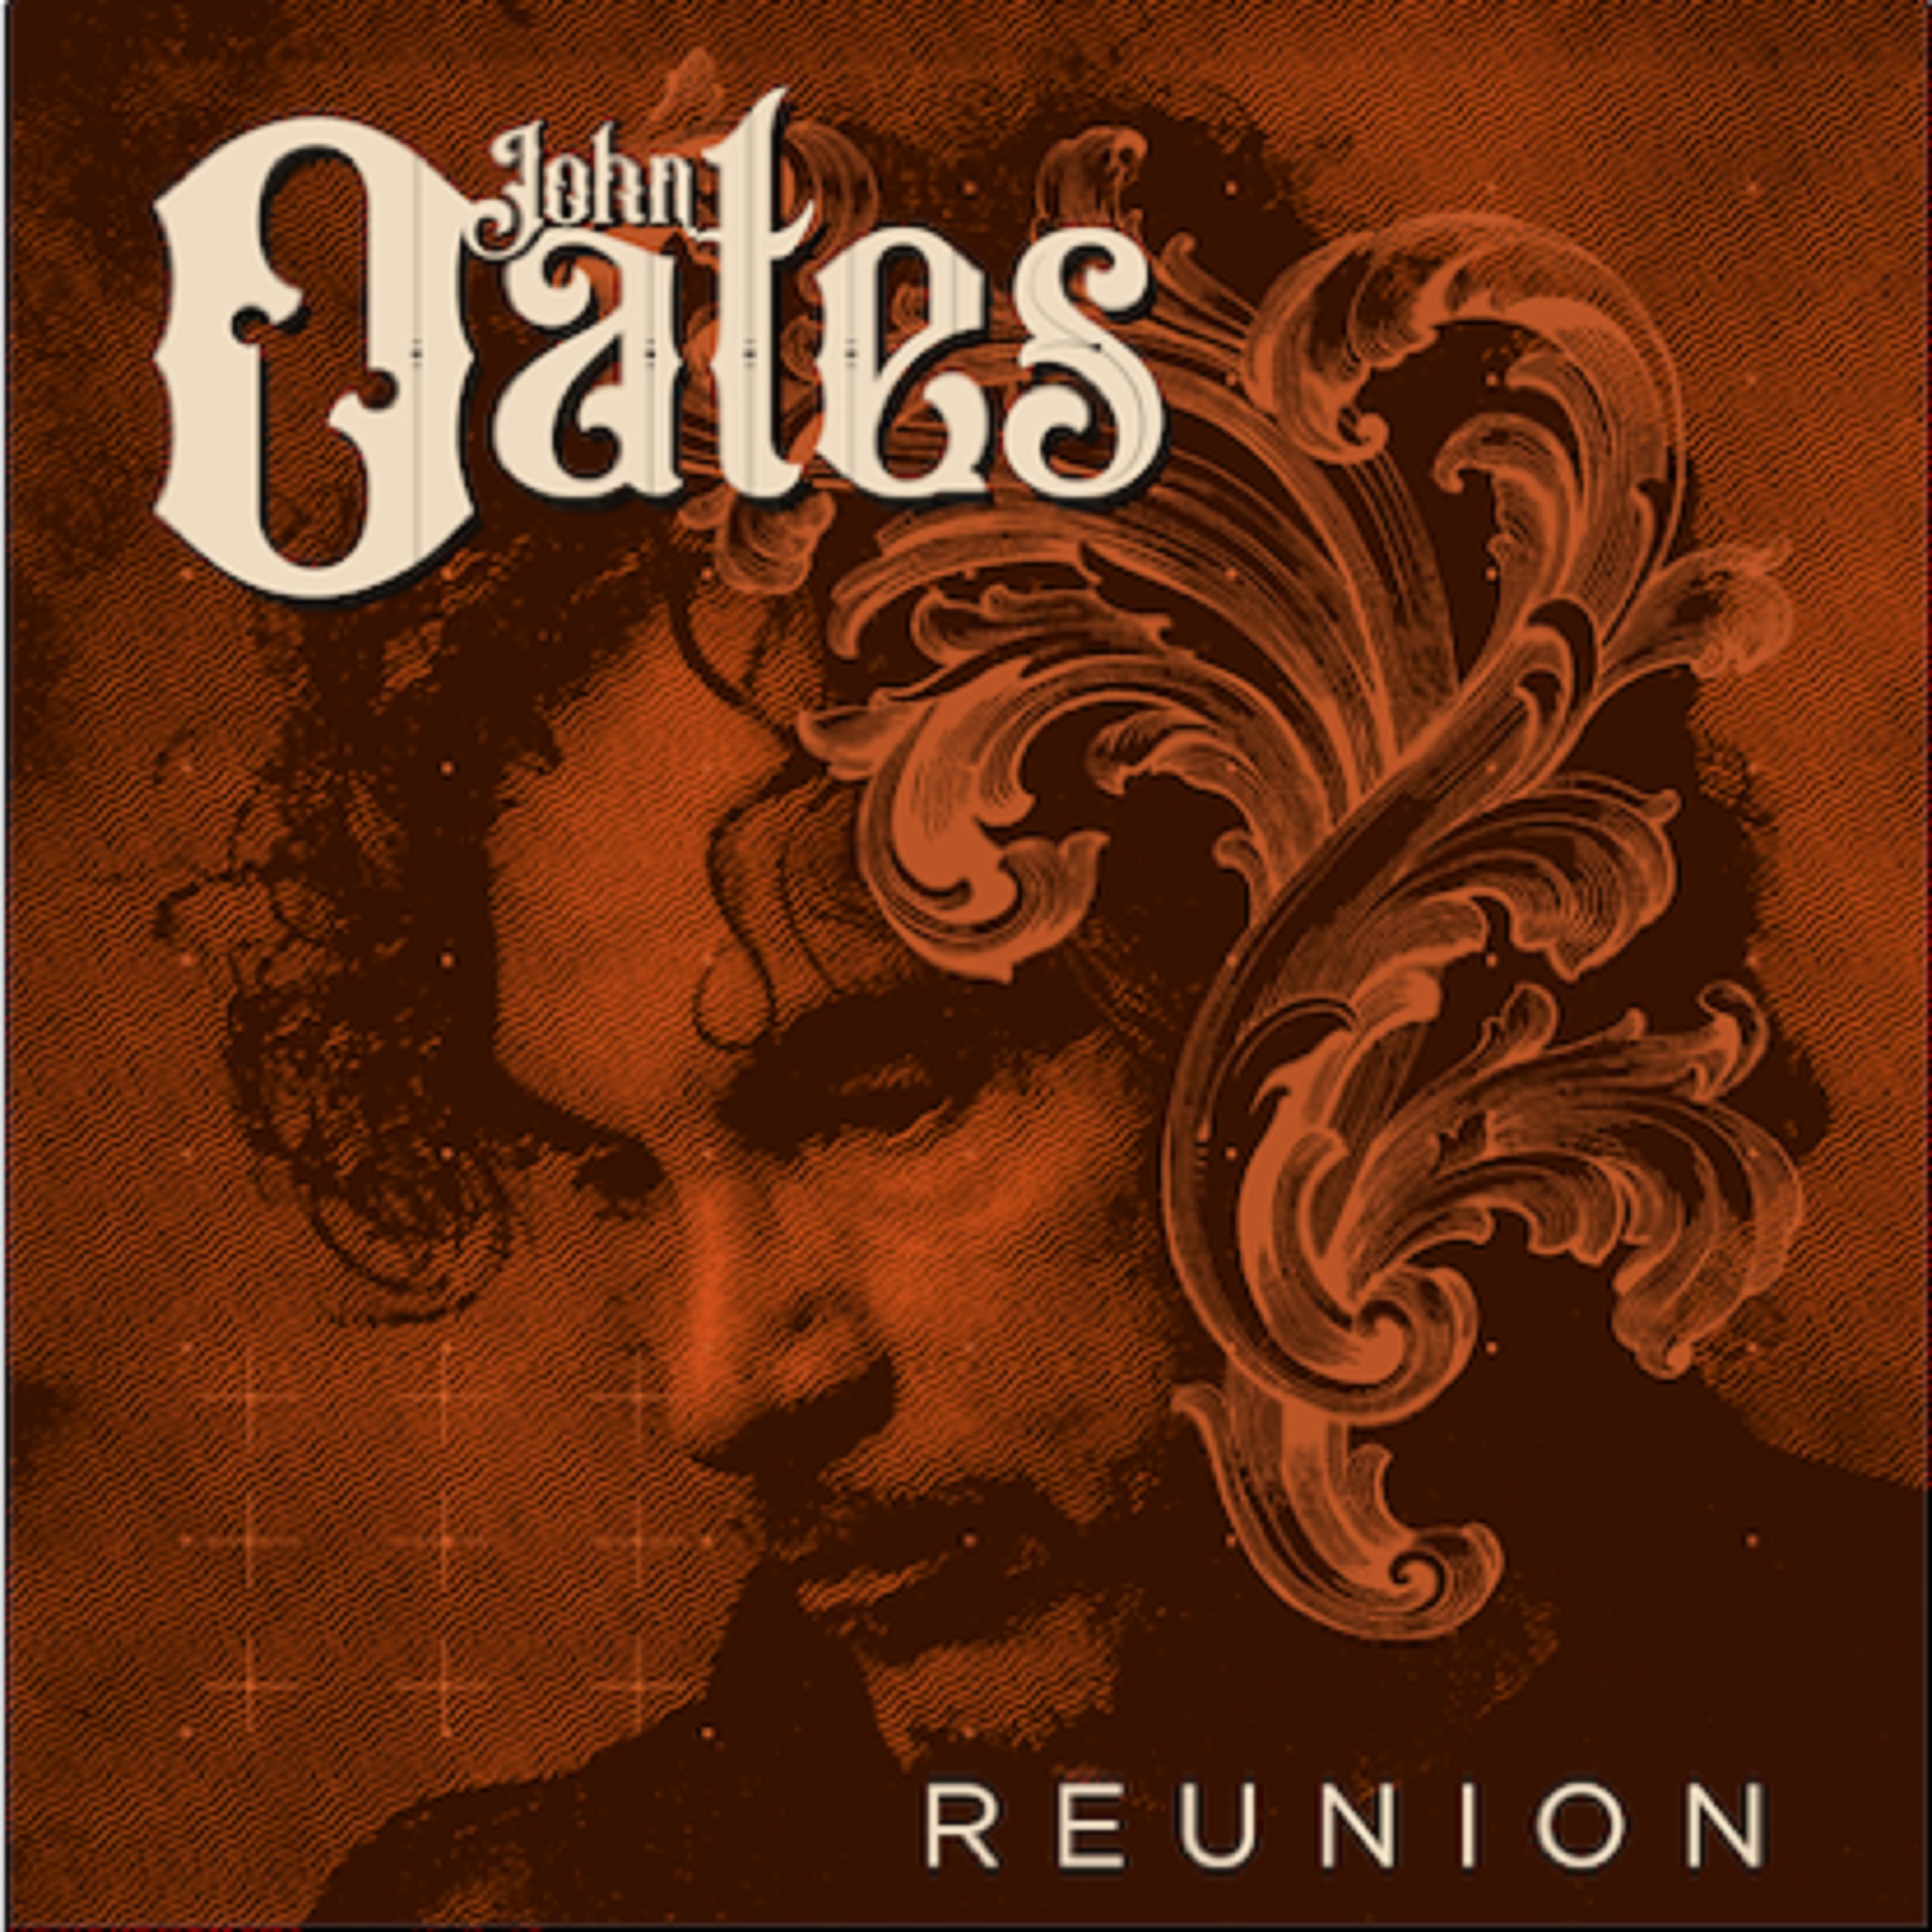 JOHN OATES Releases His Cover Of John Prine‘s “Long Monday“; New Album Reunion To Be Released May 17